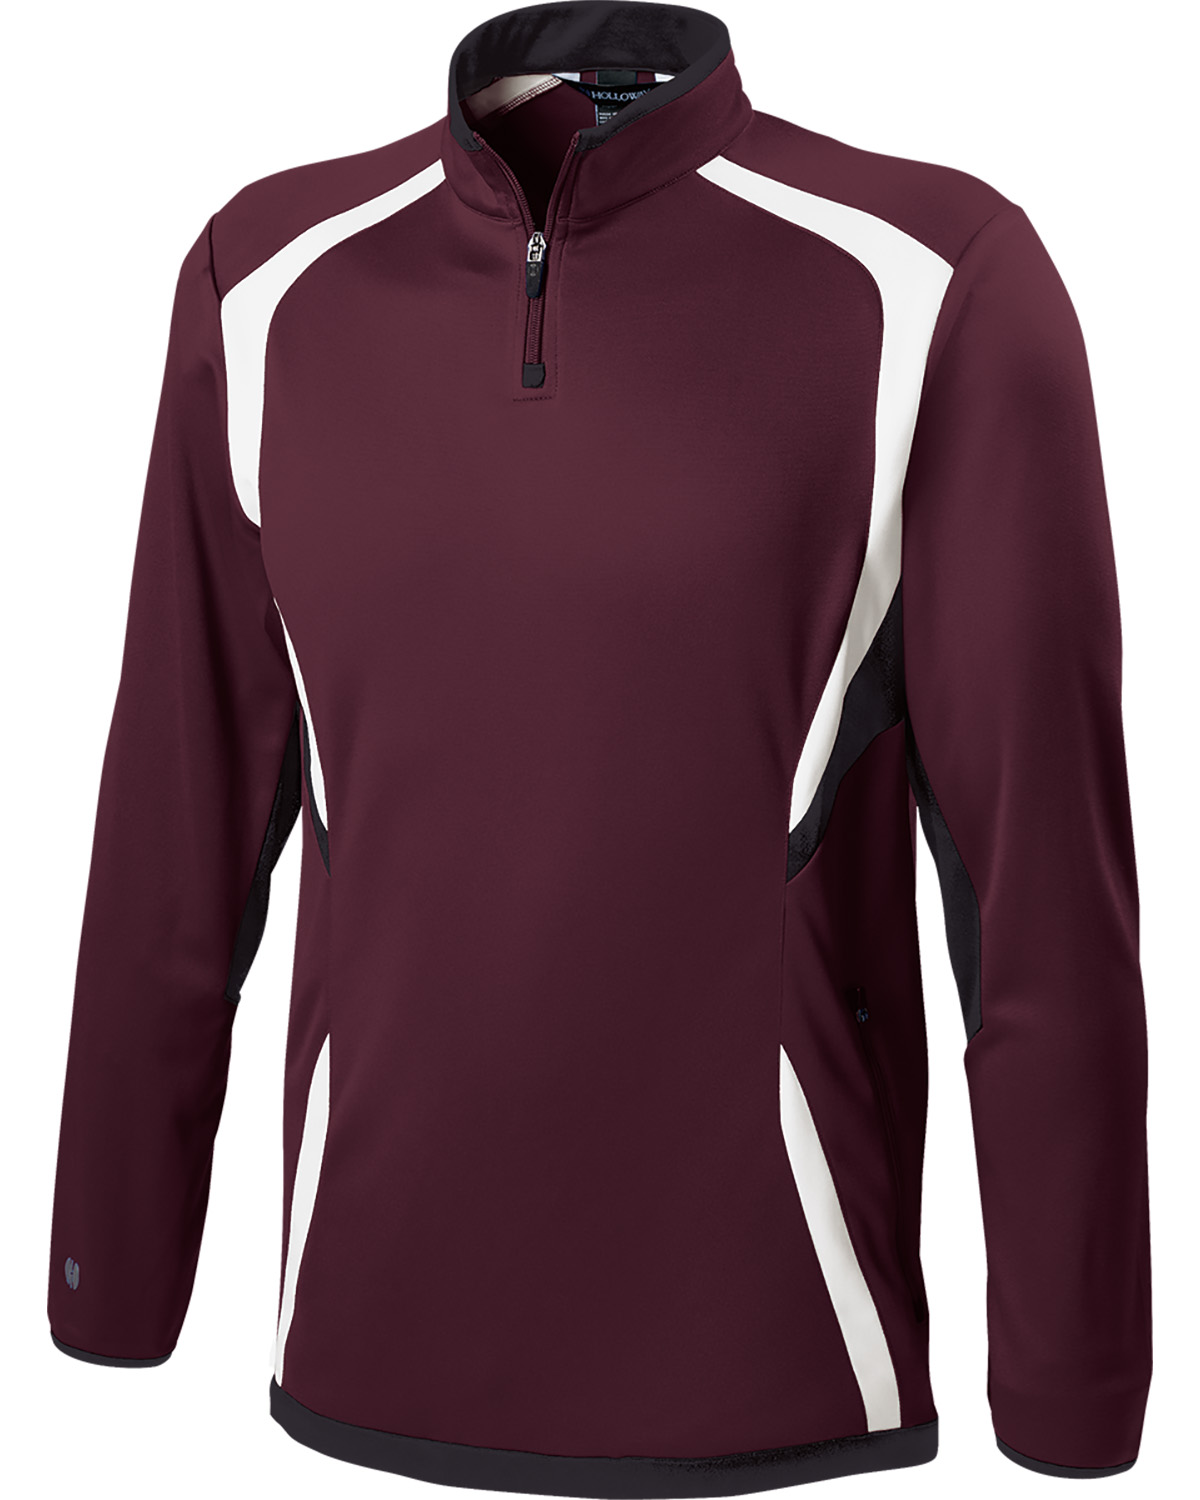 click to view MAROON/ BLK/ WHT